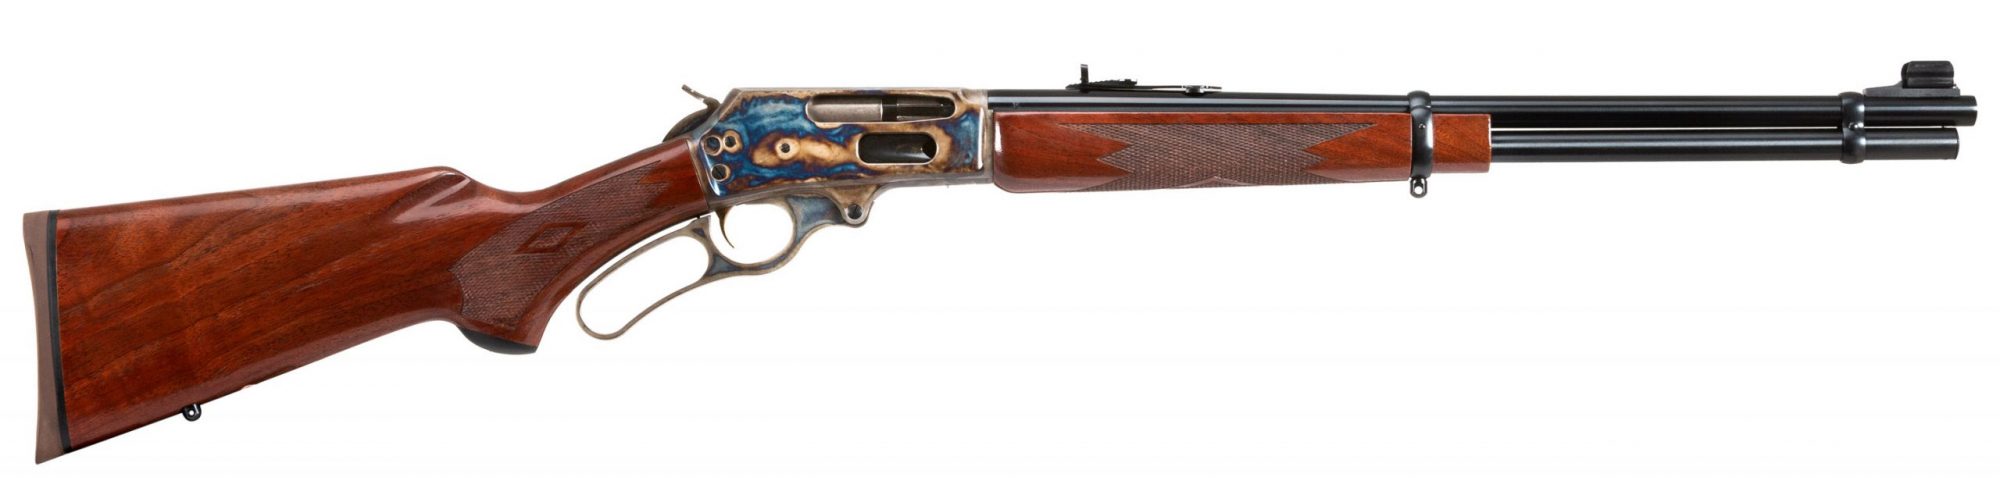 Photo of a Turnbull Finished Marlin 336C featuring bone charcoal color case hardening